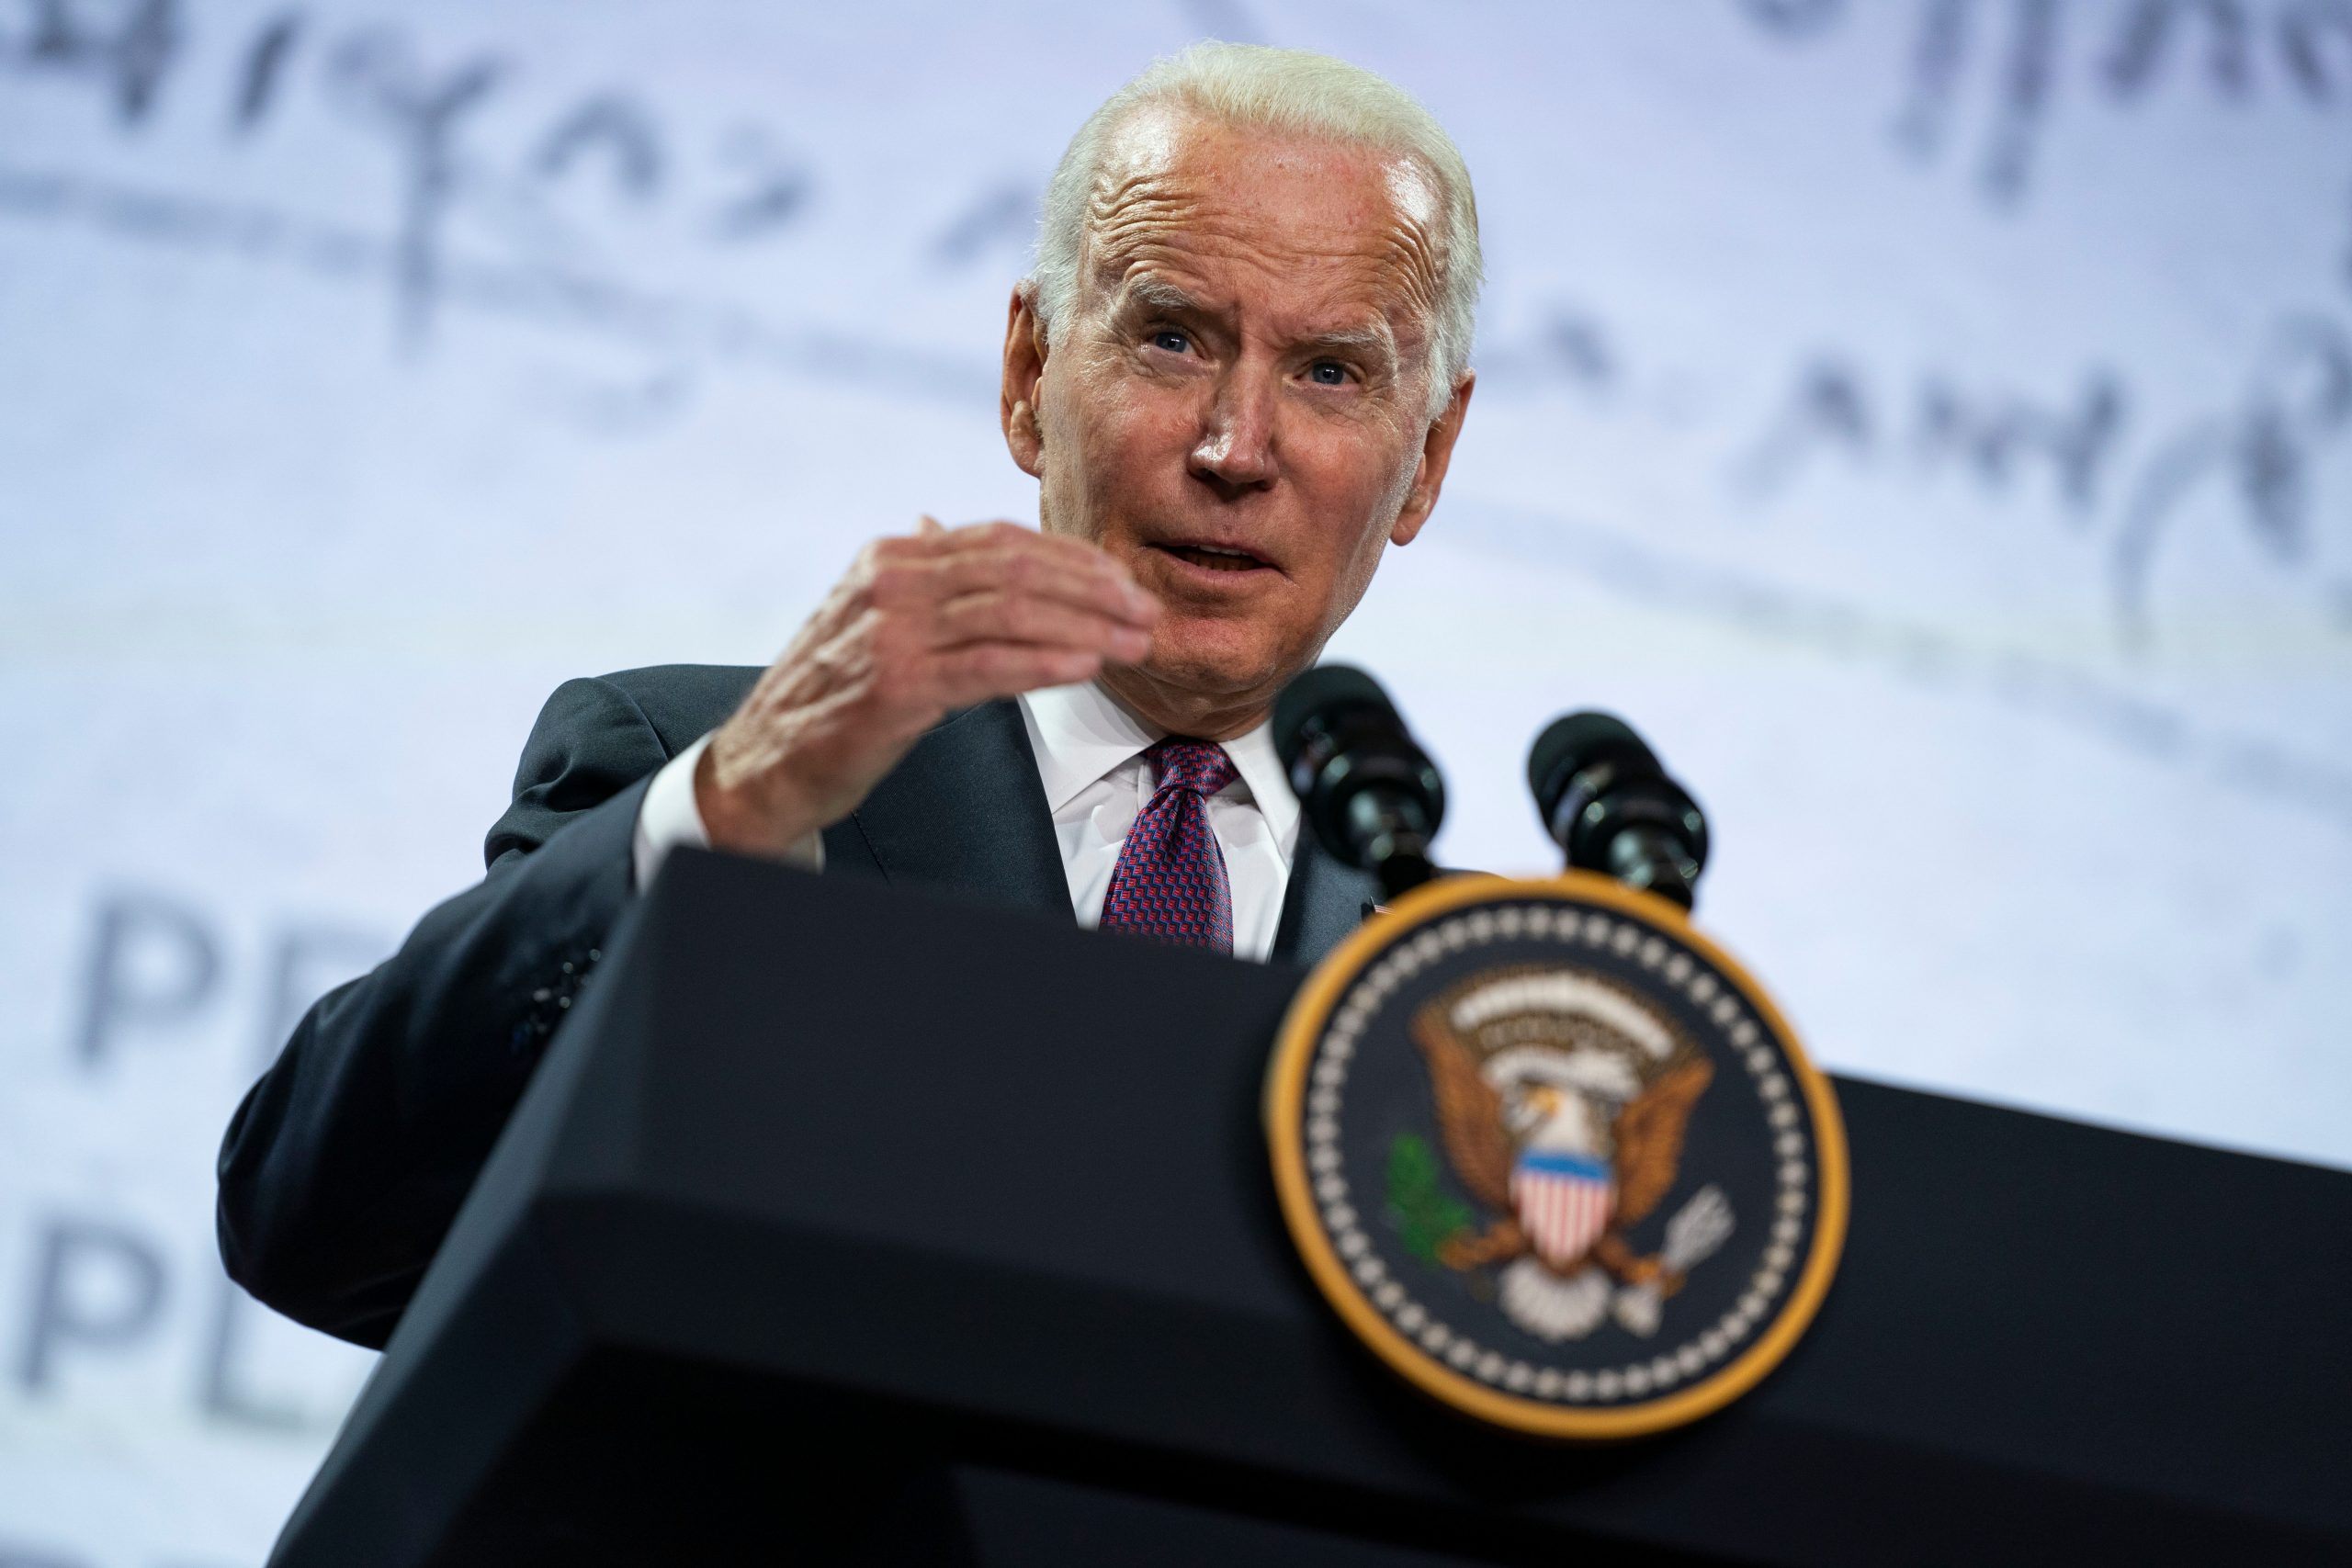 Joe Biden’s aide who accompanied him in Glasgow summit tests positive for COVID-19